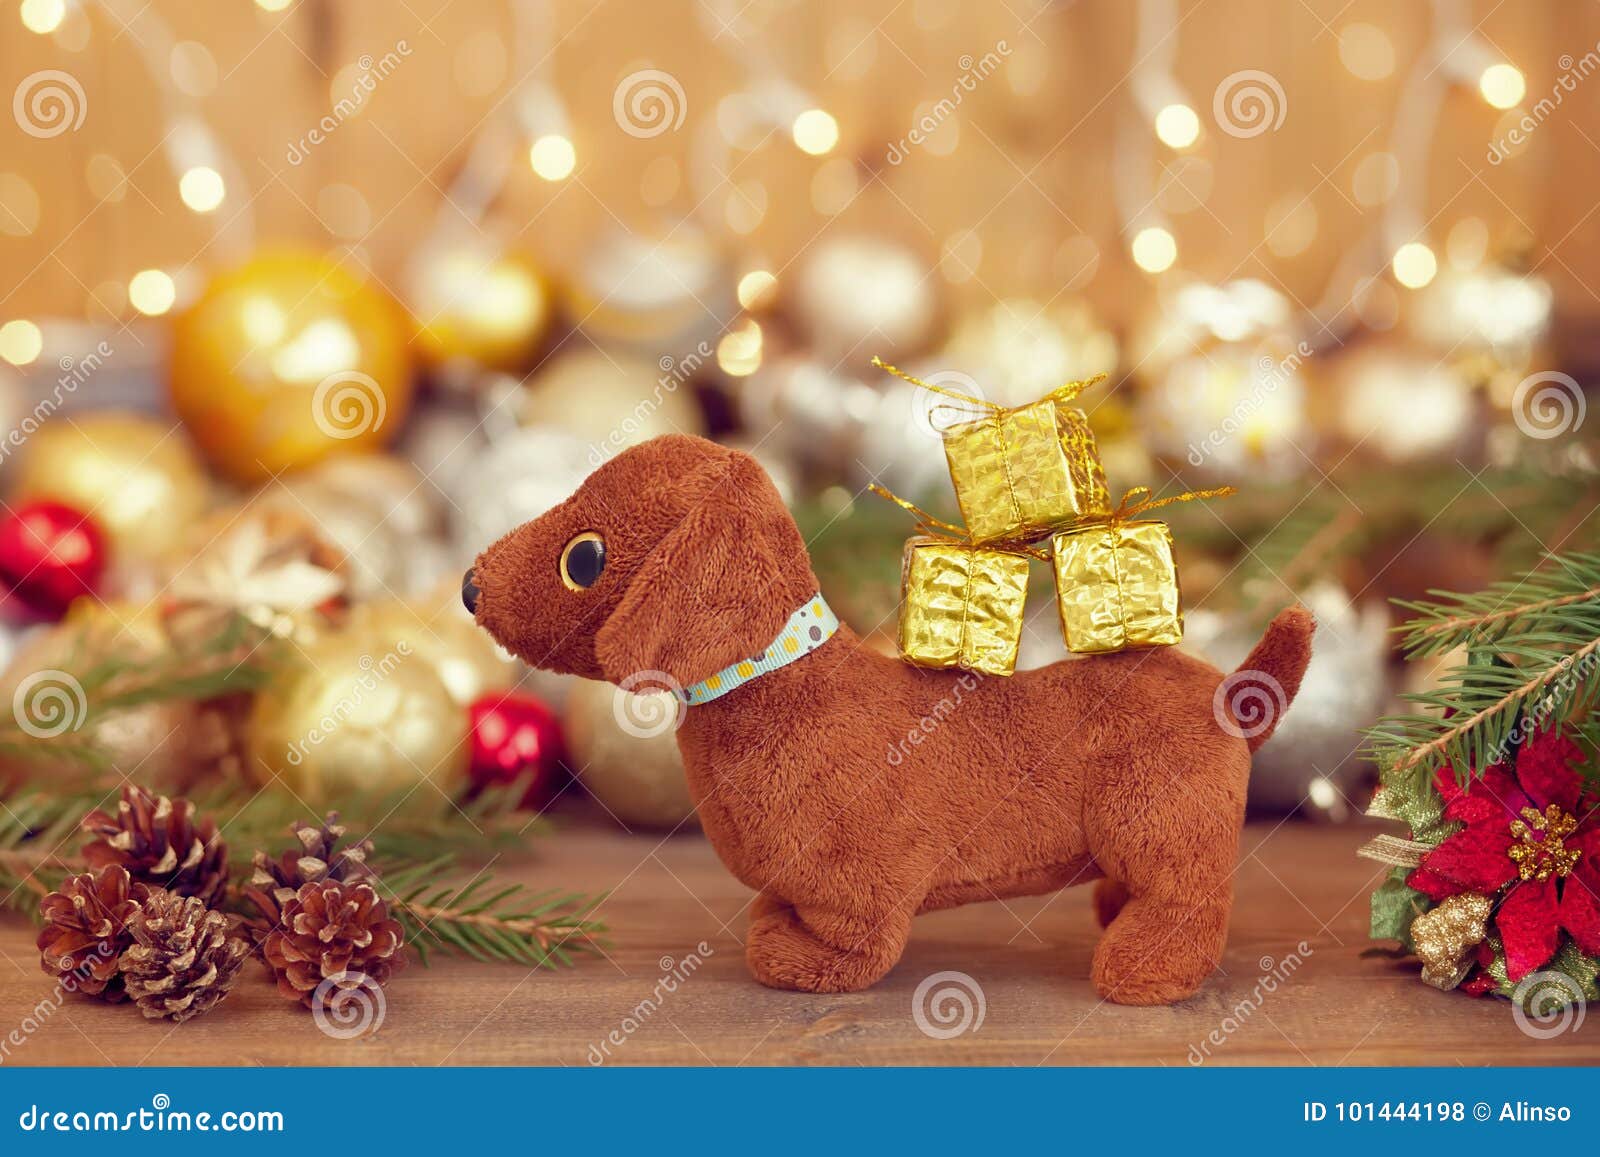 2018 Year Of The Dog Christmas Decorations Stock Photo